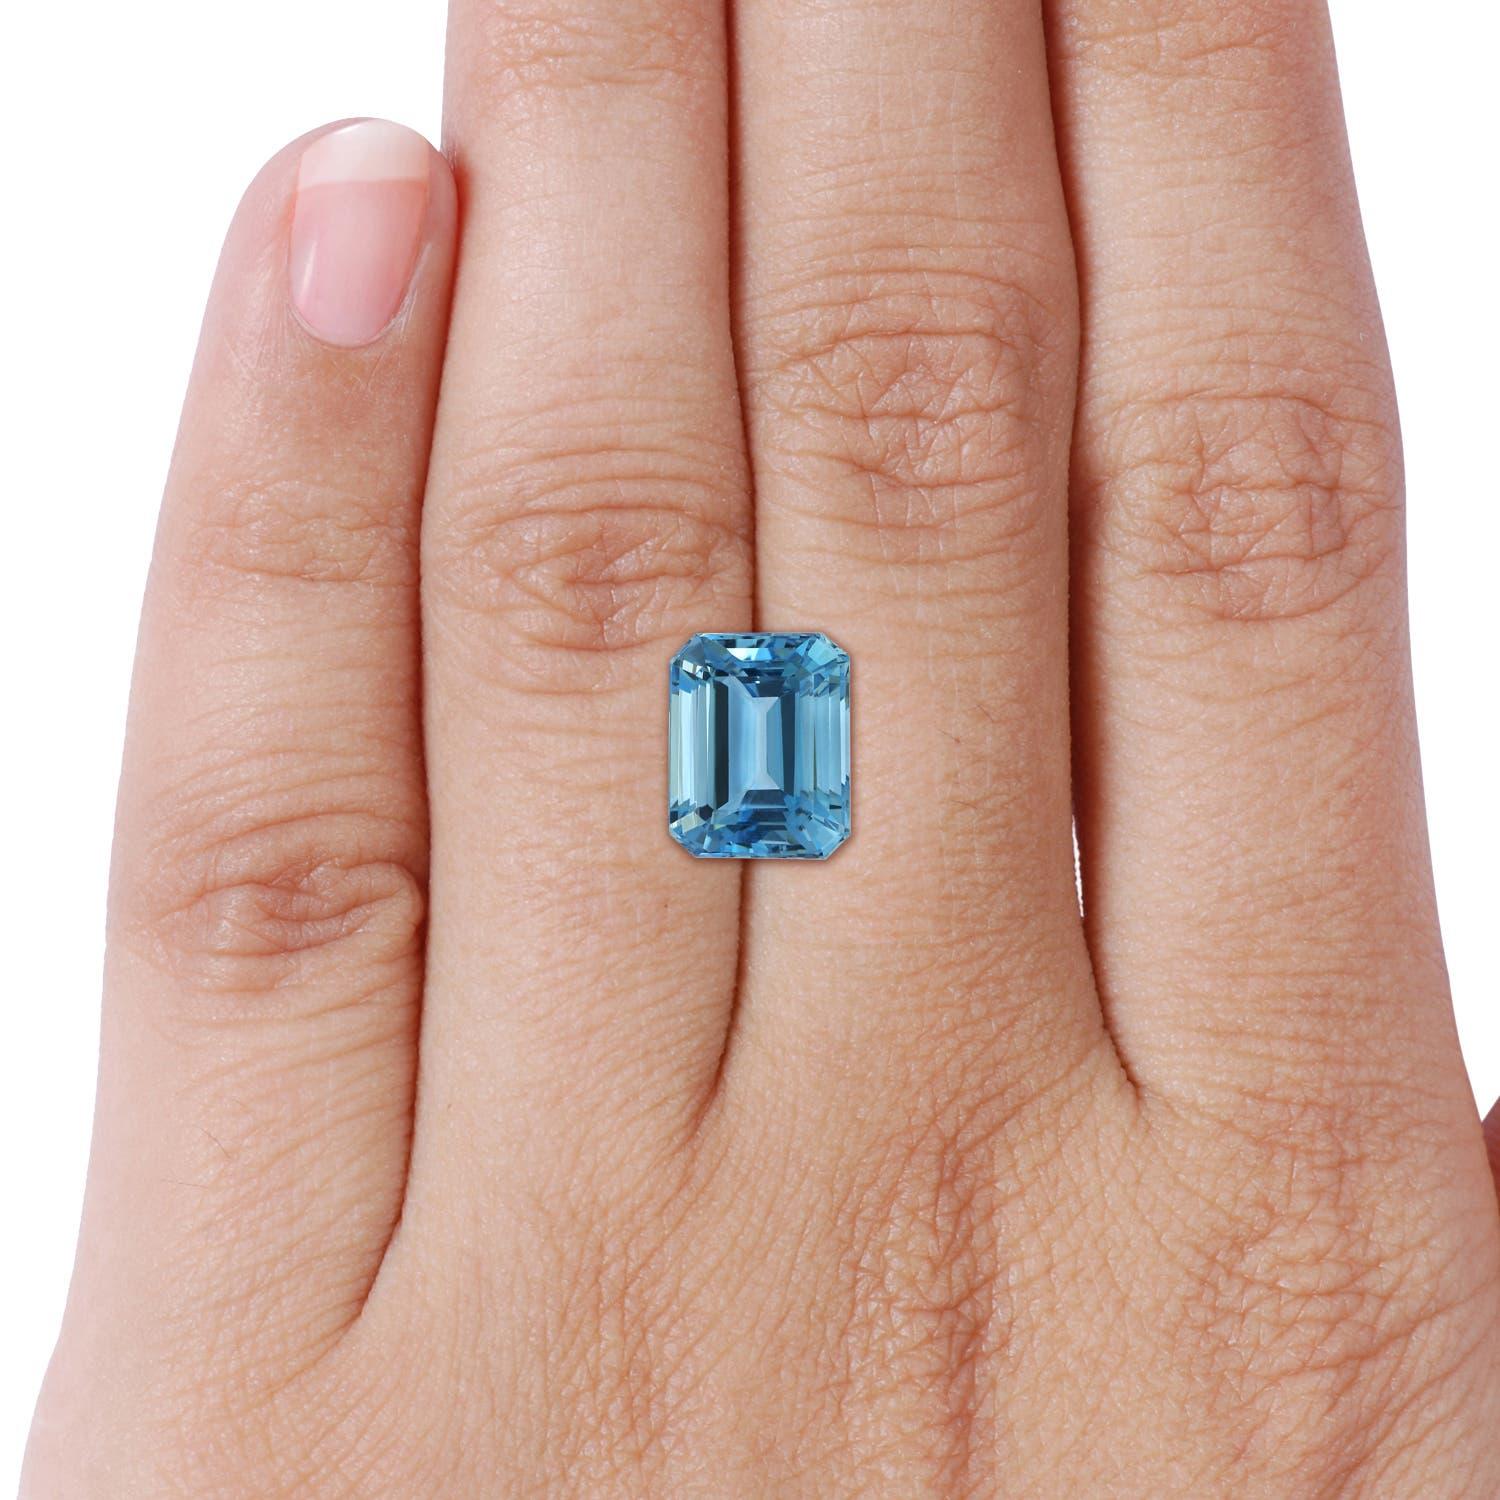 For Sale:  ANGARA GIA Certified 5.04ct Aquamarine Ring in 14K White Gold with Diamonds 6